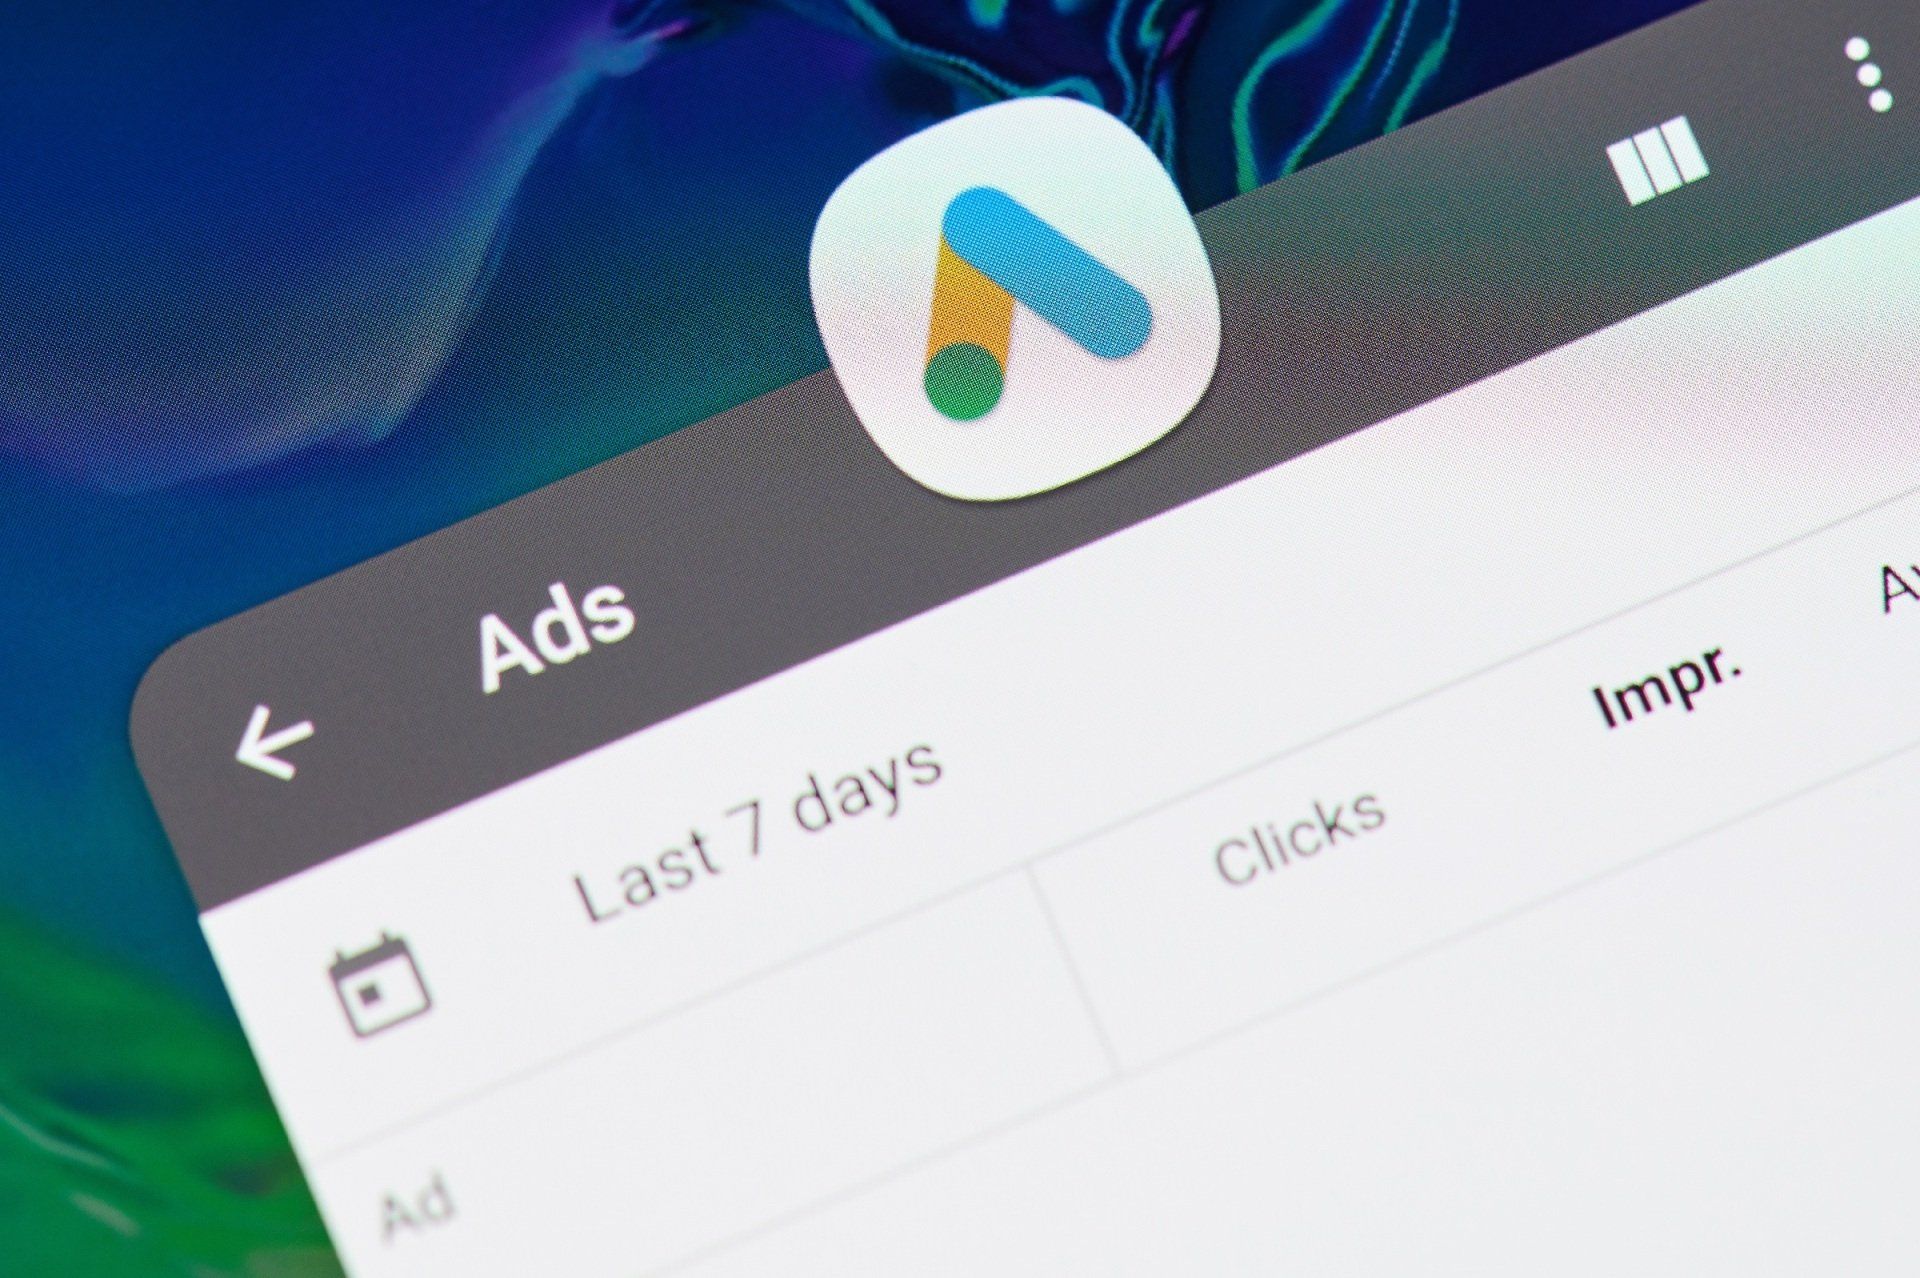 Search Advertising Tips for Businesses: The Latest Google Ads Features